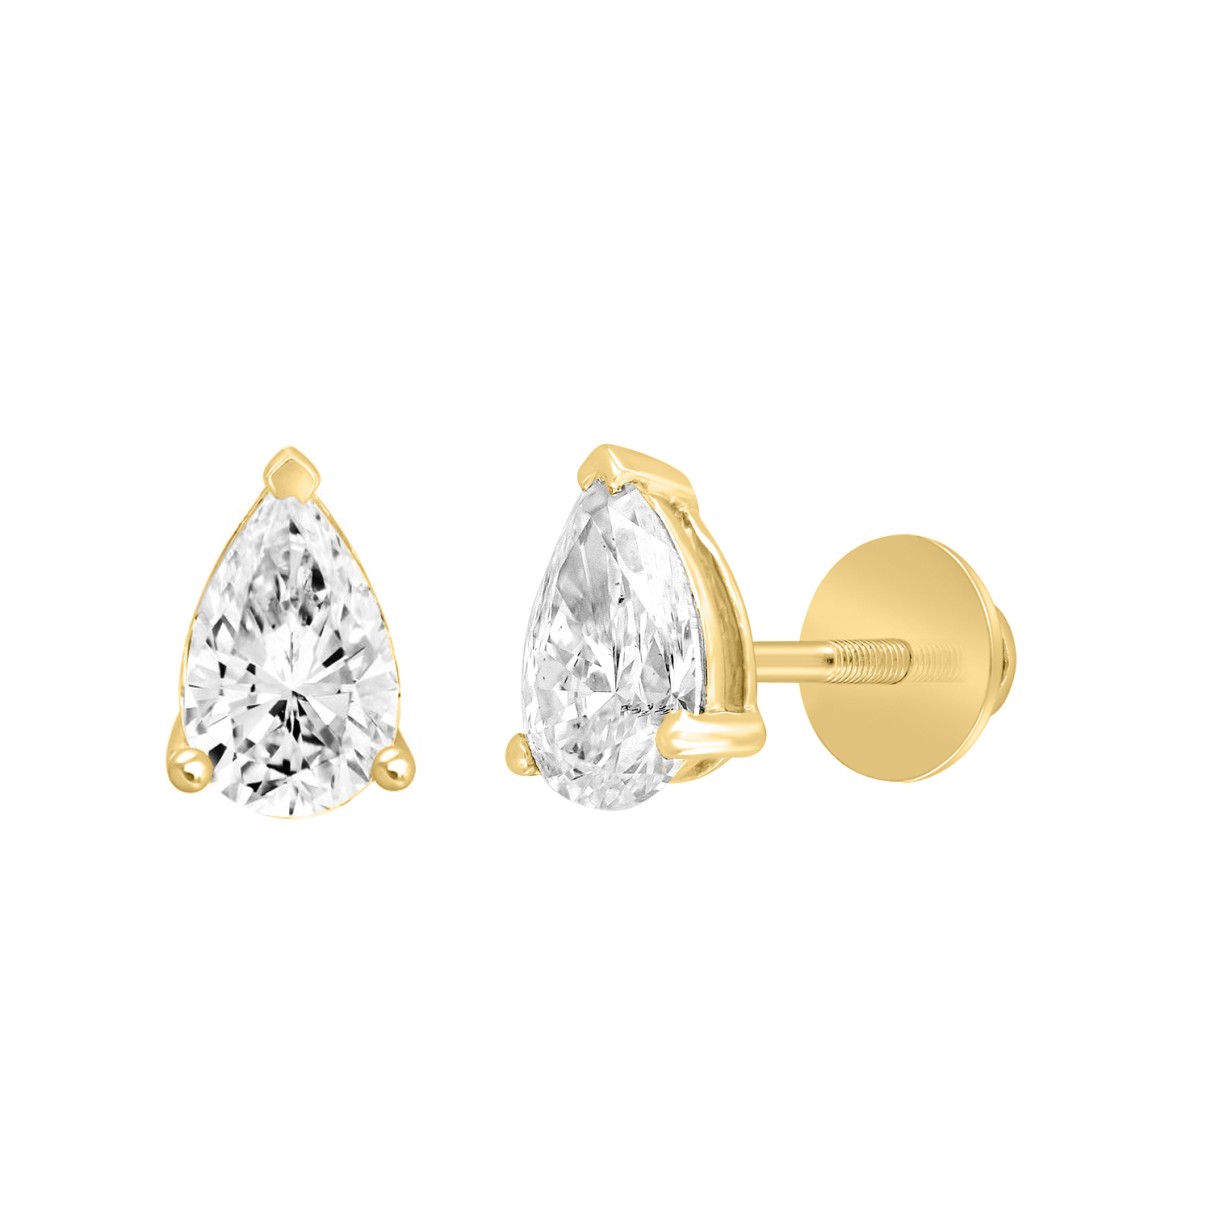 LADIES SOLITAIRE EARRINGS  3CT PEAR DIAMOND 14K YELLOW GOLD